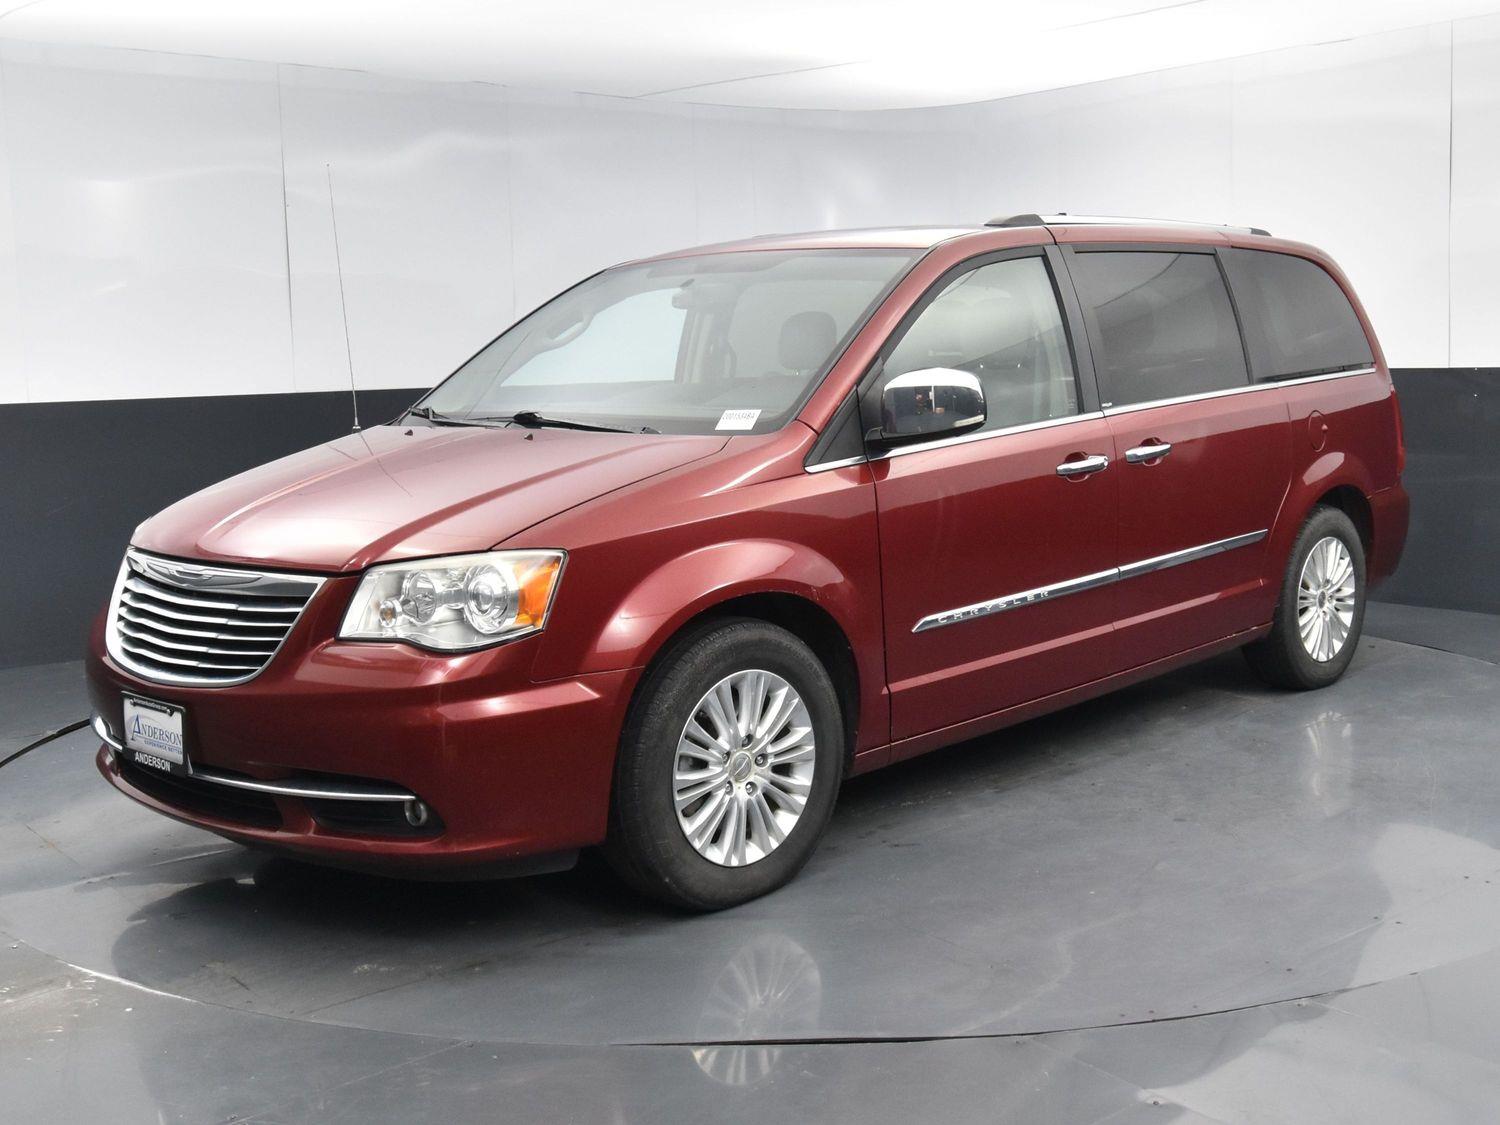 Used 2013 Chrysler Town And Country Limited Minivans for sale in Grand Island NE